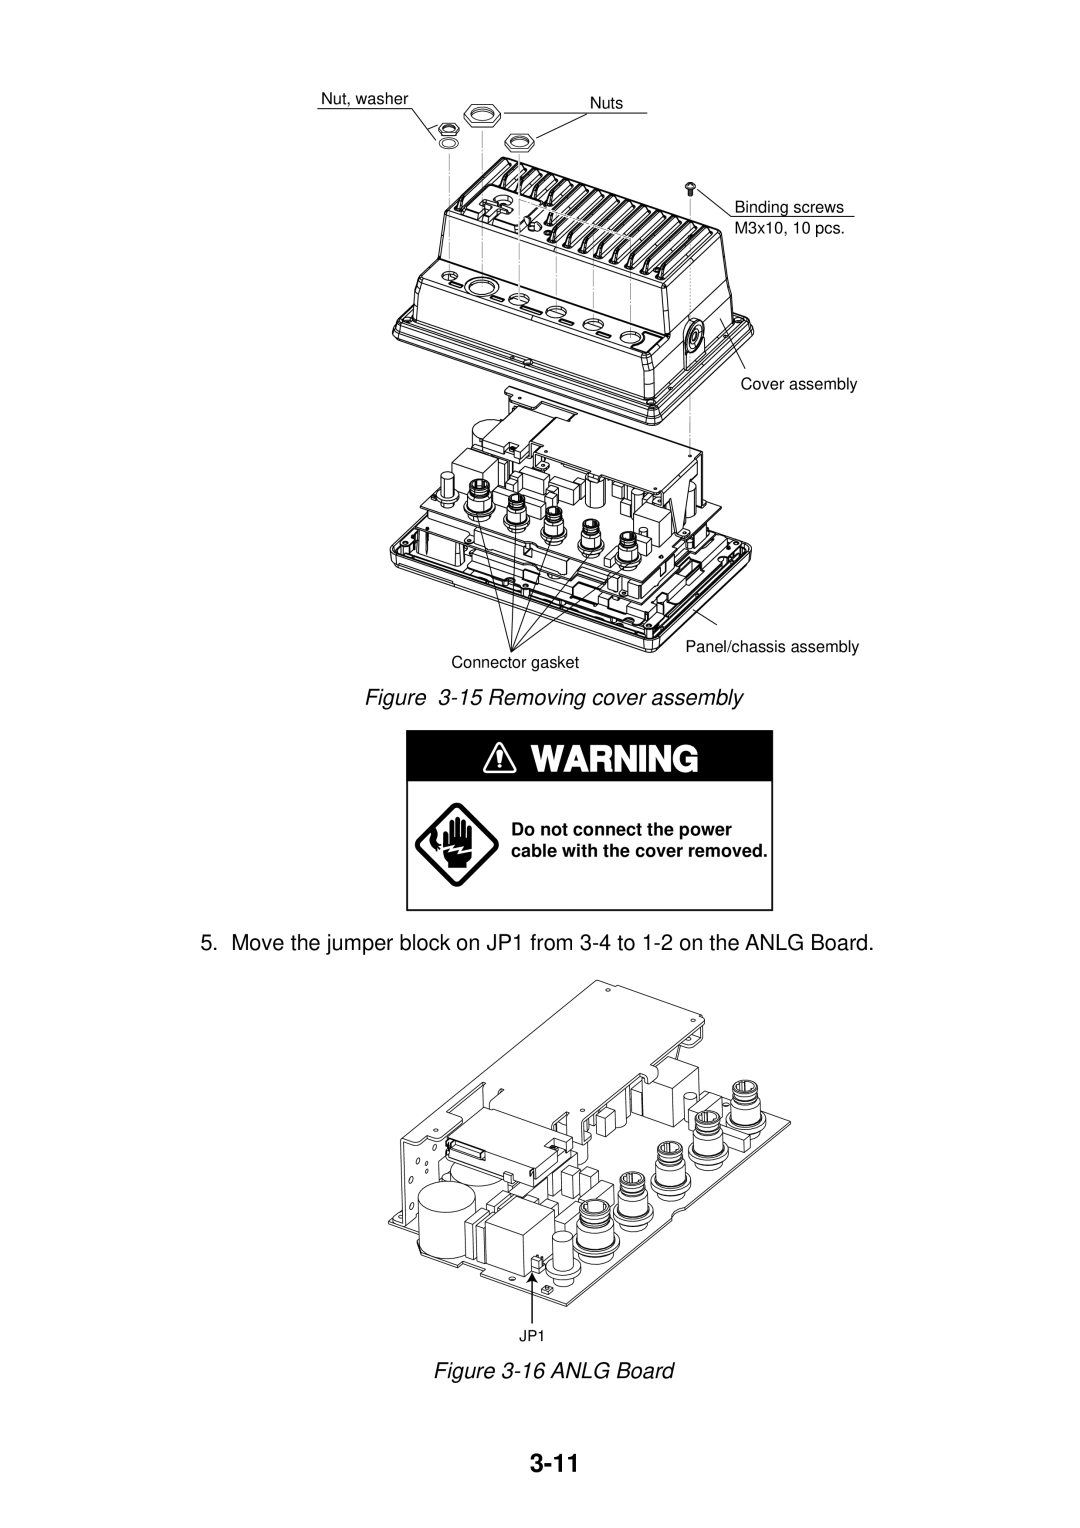 Furuno GP-1850DF installation manual Removing cover assembly 